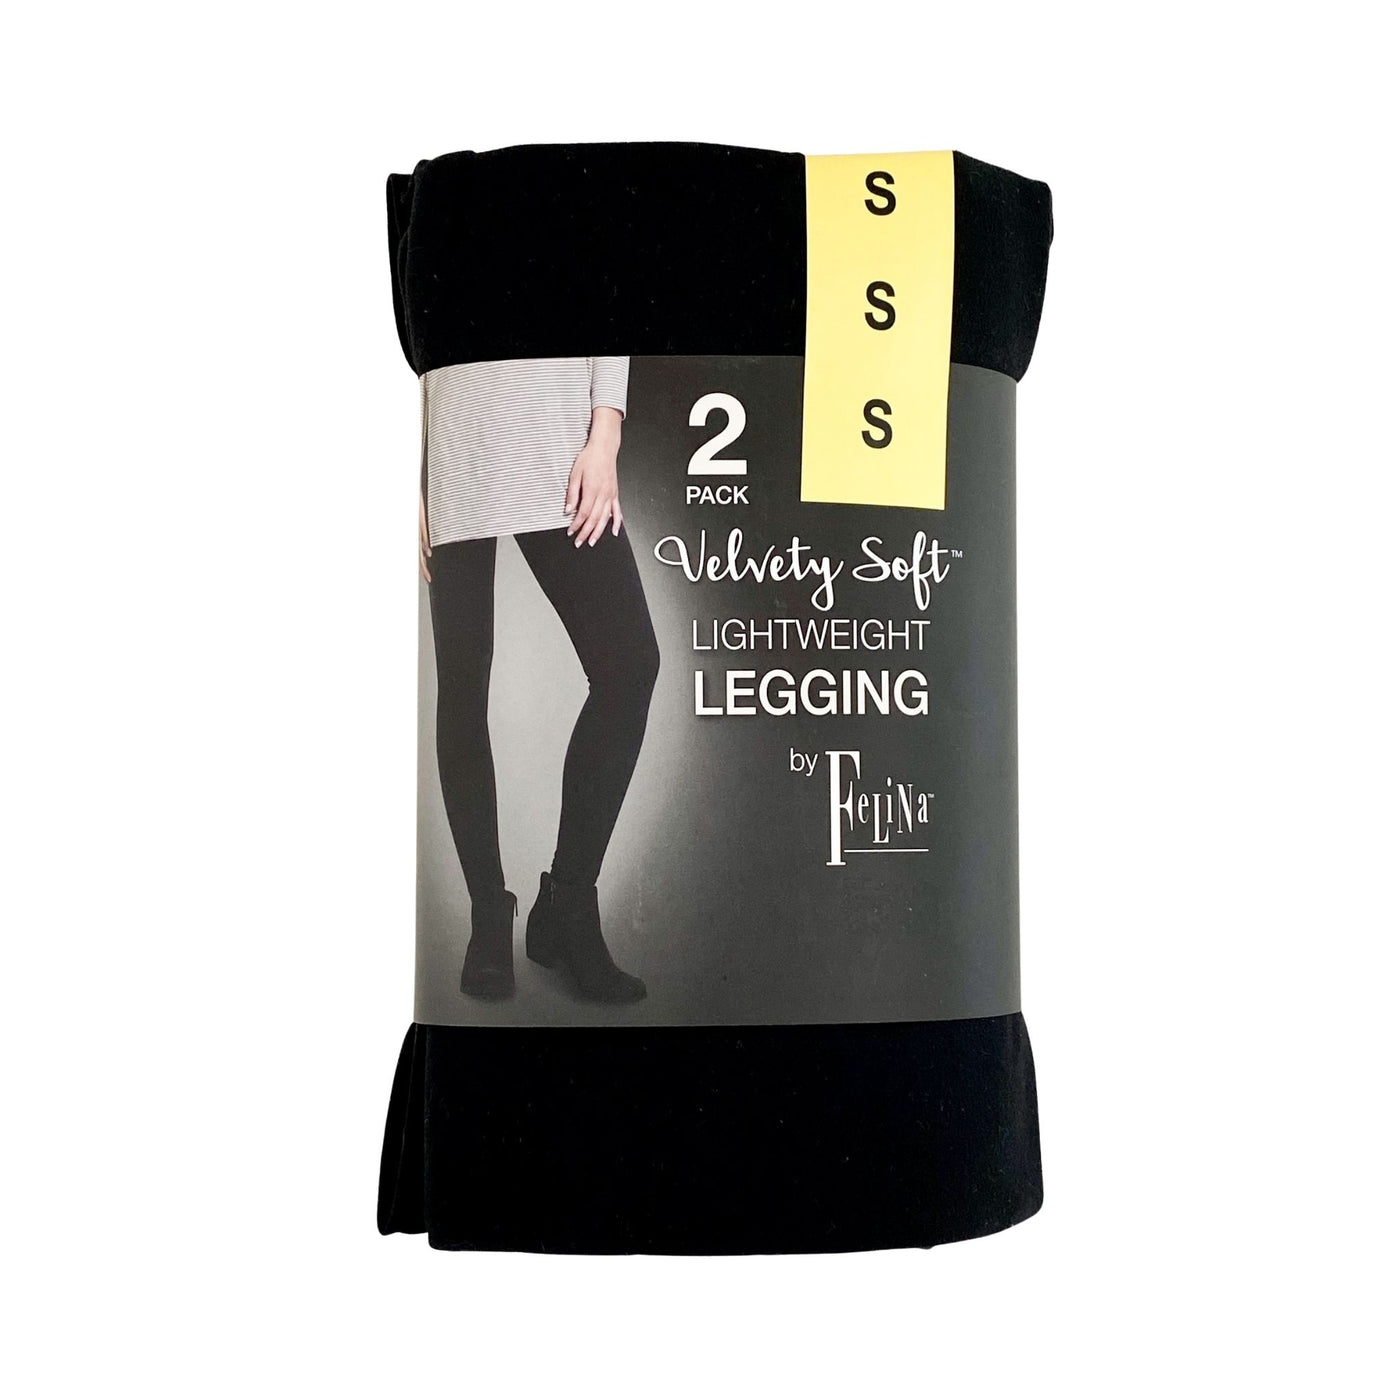 Felina 2 Pack Black Leggings Wide Waistband Sueded Lightweight Size Small